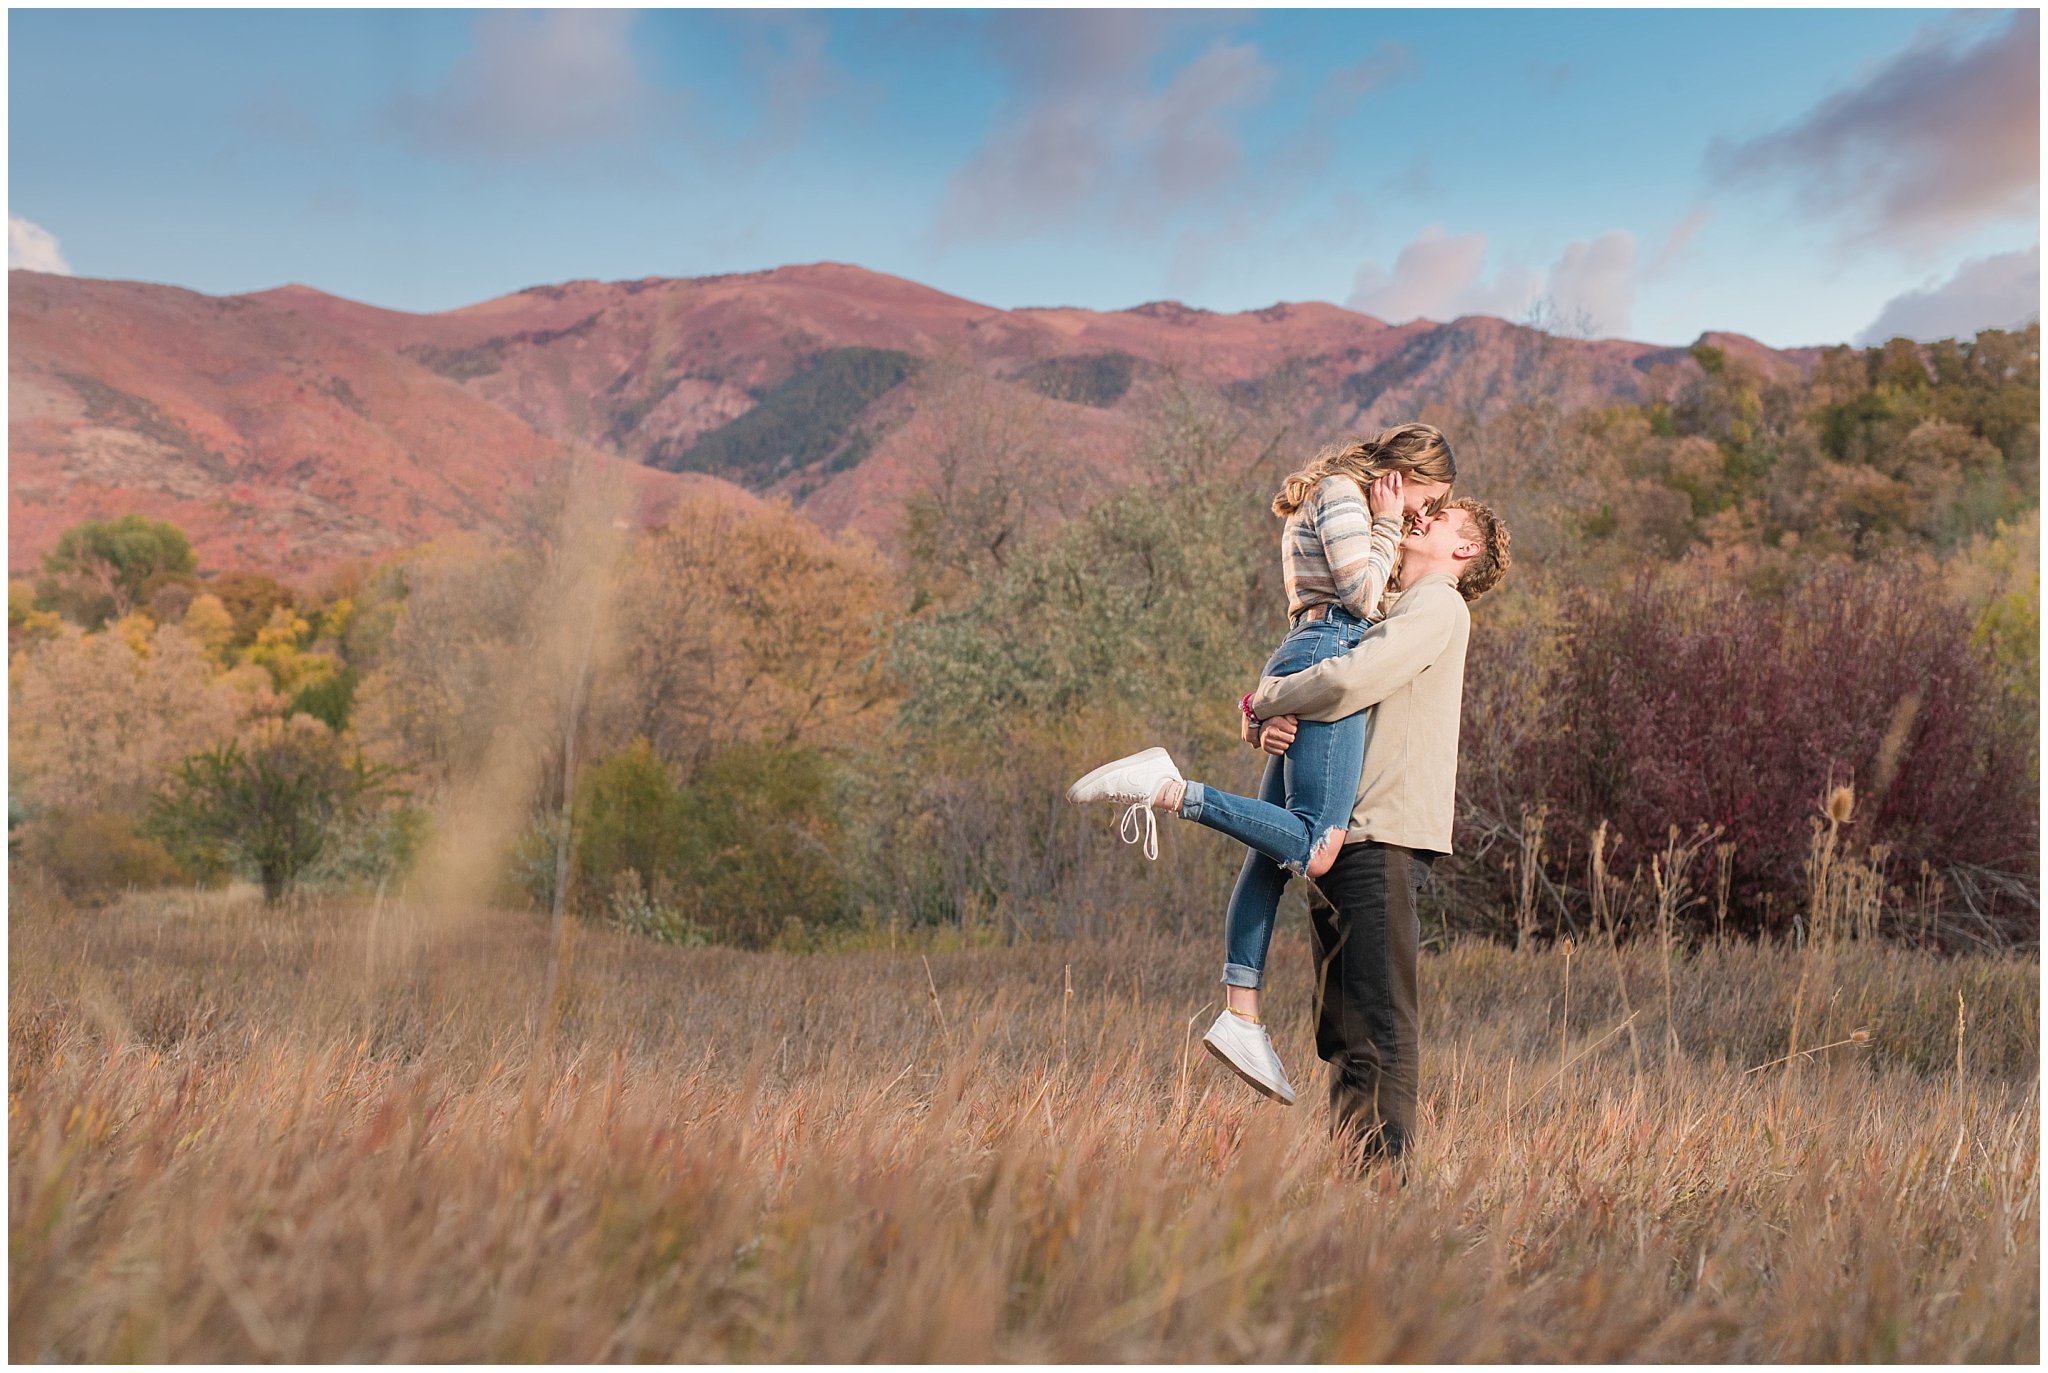 Candid photos of couple in casual cream colored fall sweaters with amazing sunset | Utah Fall Engagement Session in a Golden Field | Jessie and Dallin Photography